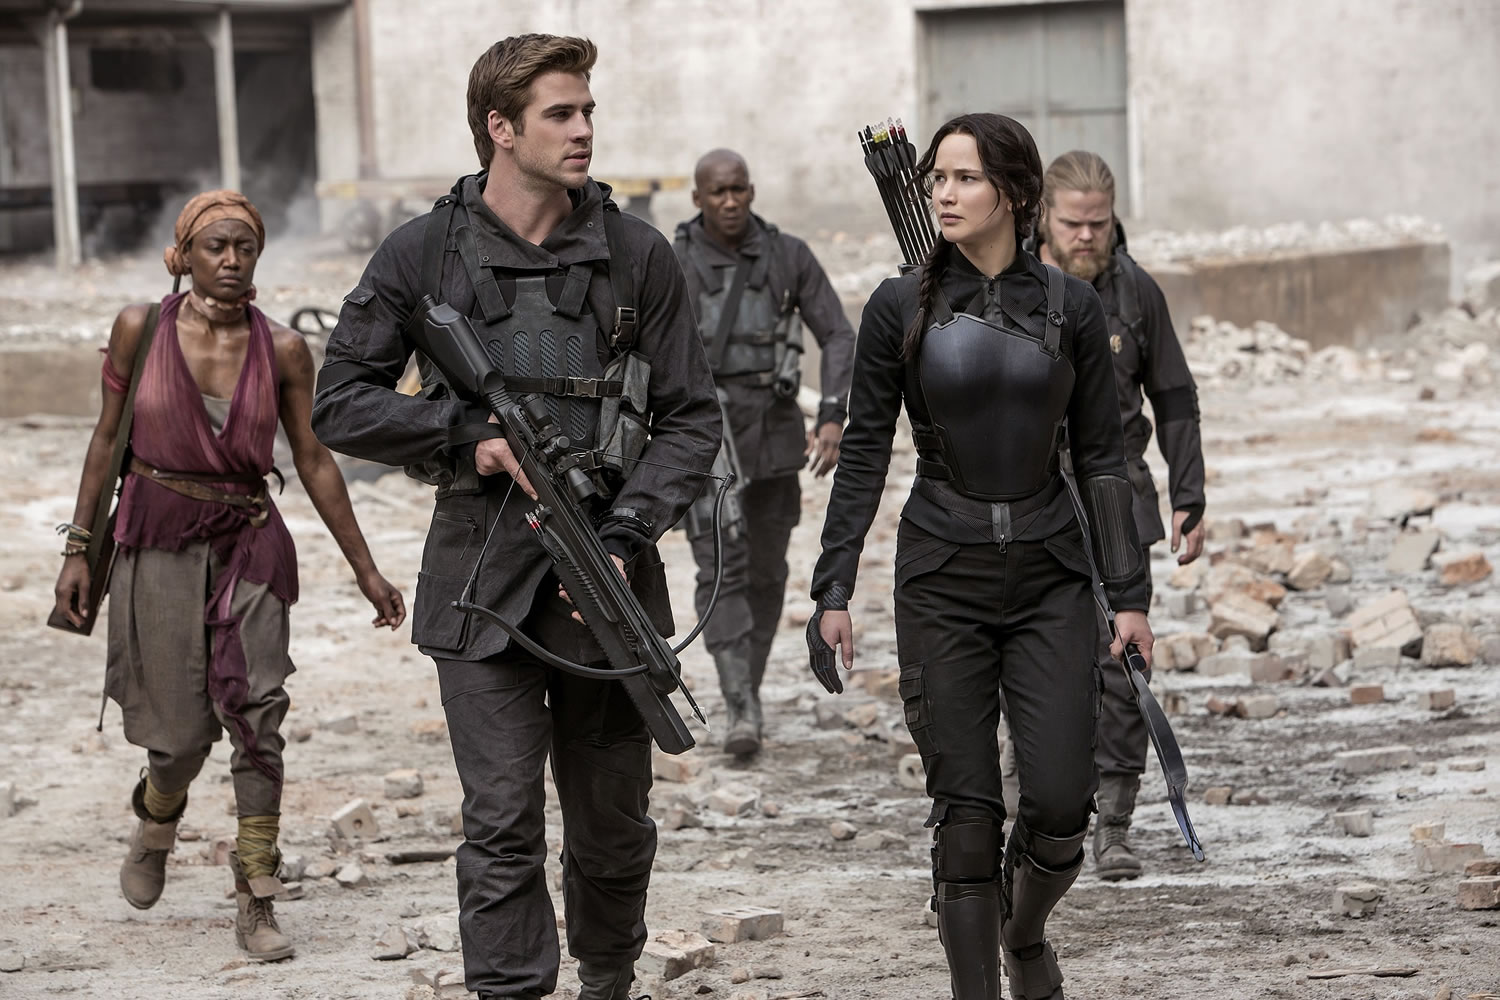 Liam Hemsworth as Gale Hawthorne and Jennifer Lawrence as Katniss Everdeen reprise their roles in &quot;The Hunger Games: Mockingjay -- Part 1.&quot;